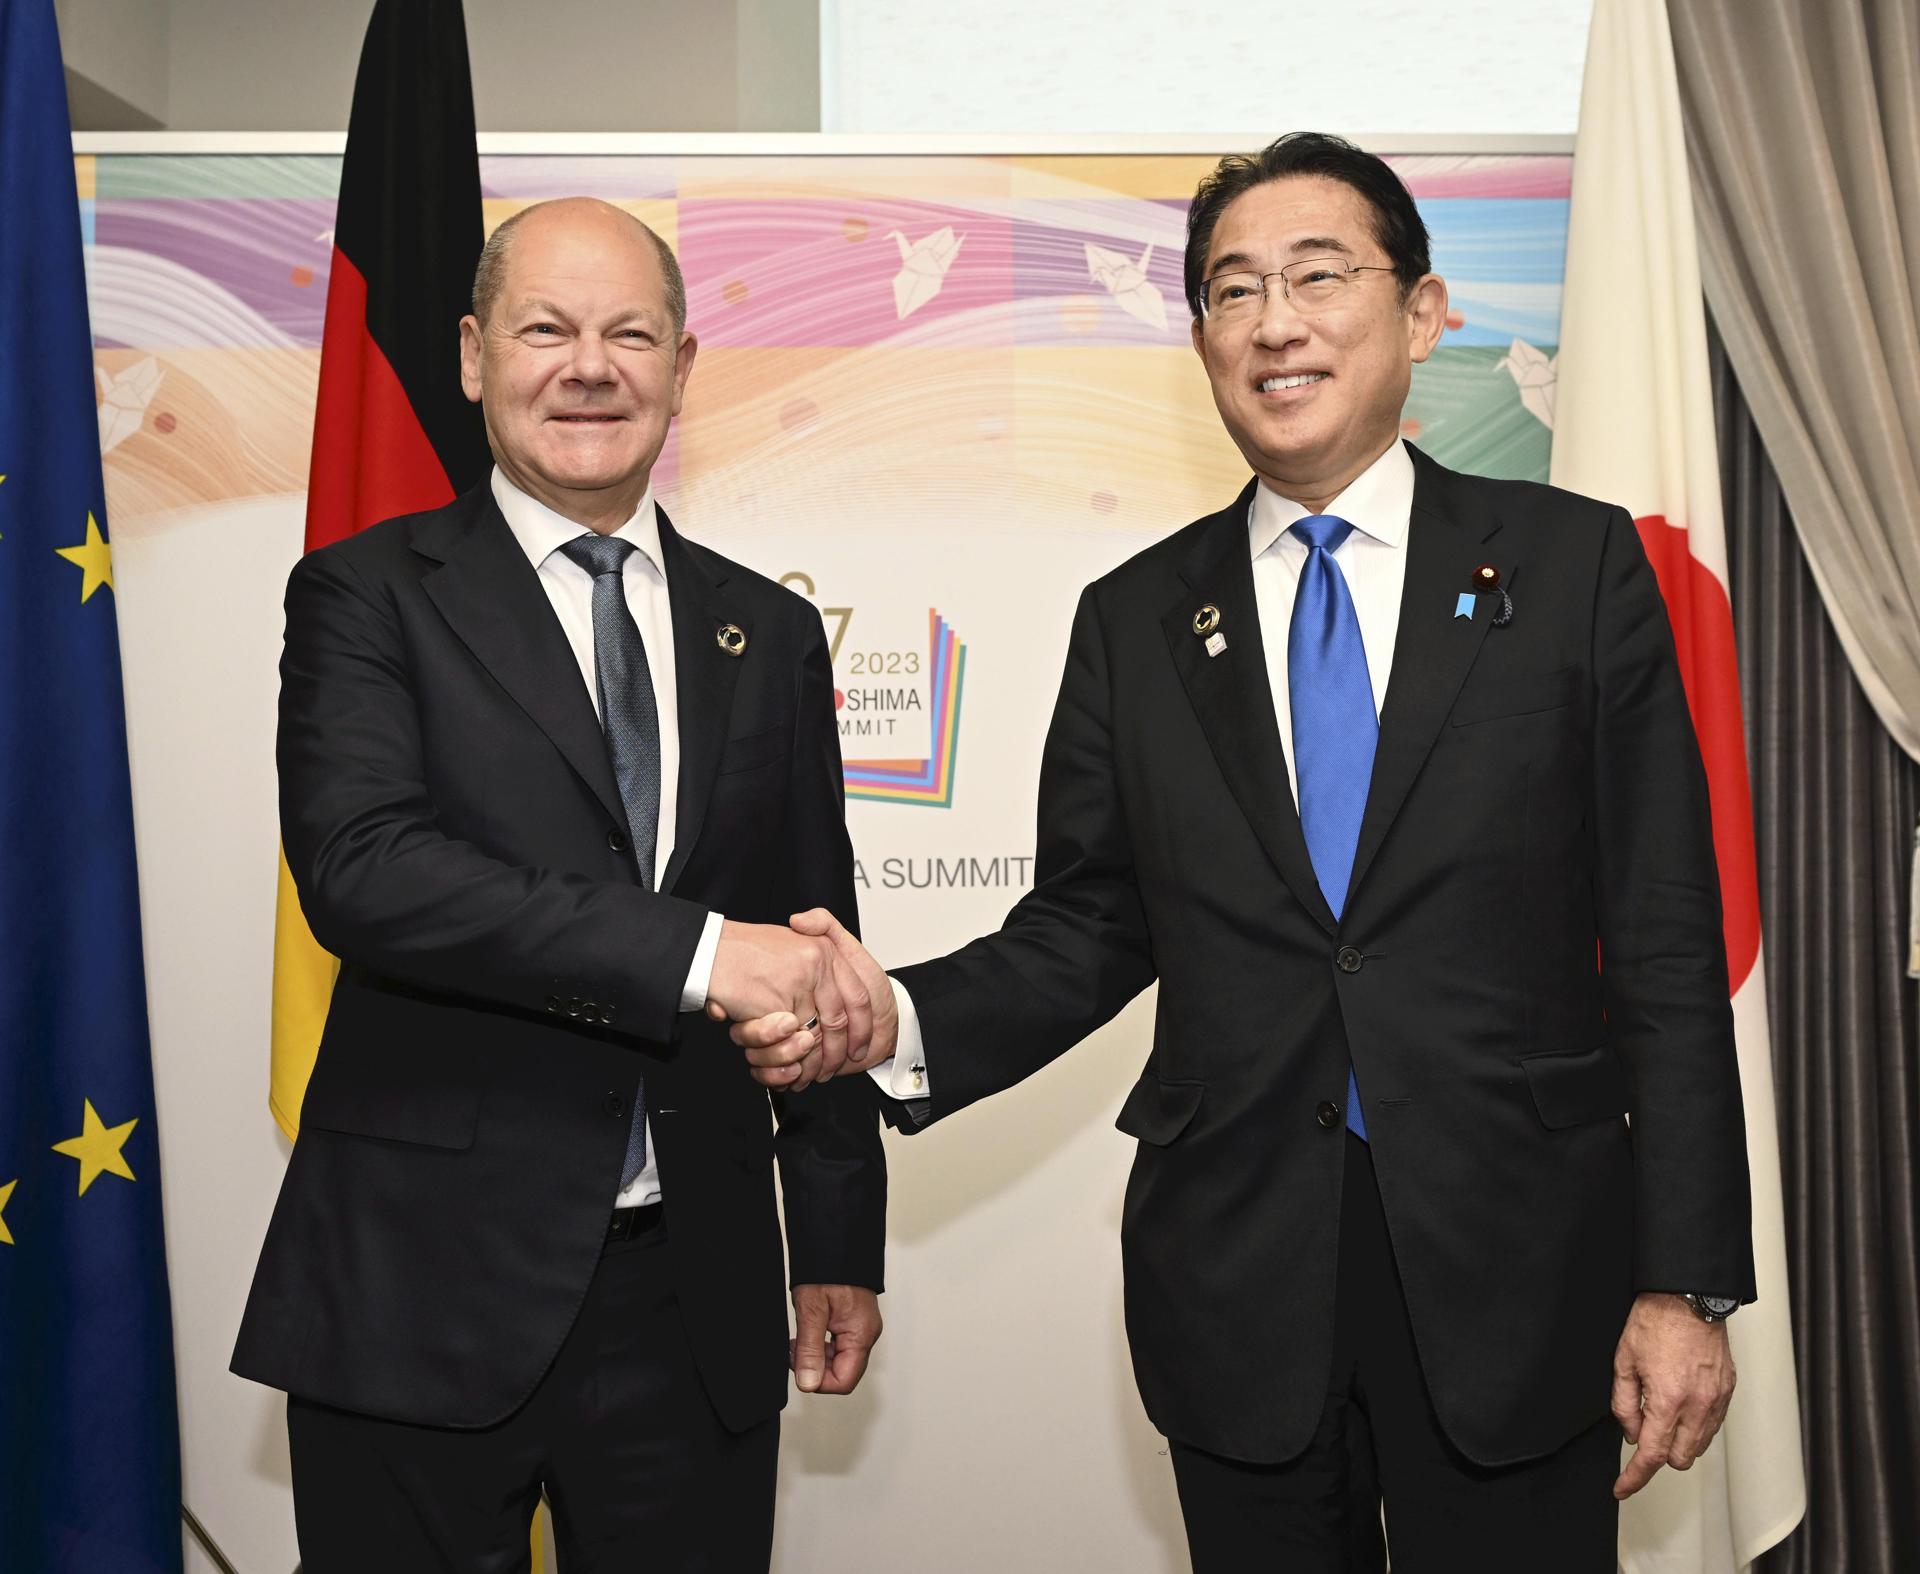 German Chancellor Olaf Scholz (L) and Japanese Prime Minister Fumio Kishida shake hands prior to their bilateral meeting at the G7 Summit, in Hiroshima, Japan, 19 May 2023. EFE-EPA/POOL JAPAN OUT EDITORIAL USE ONLY/NO SALES
